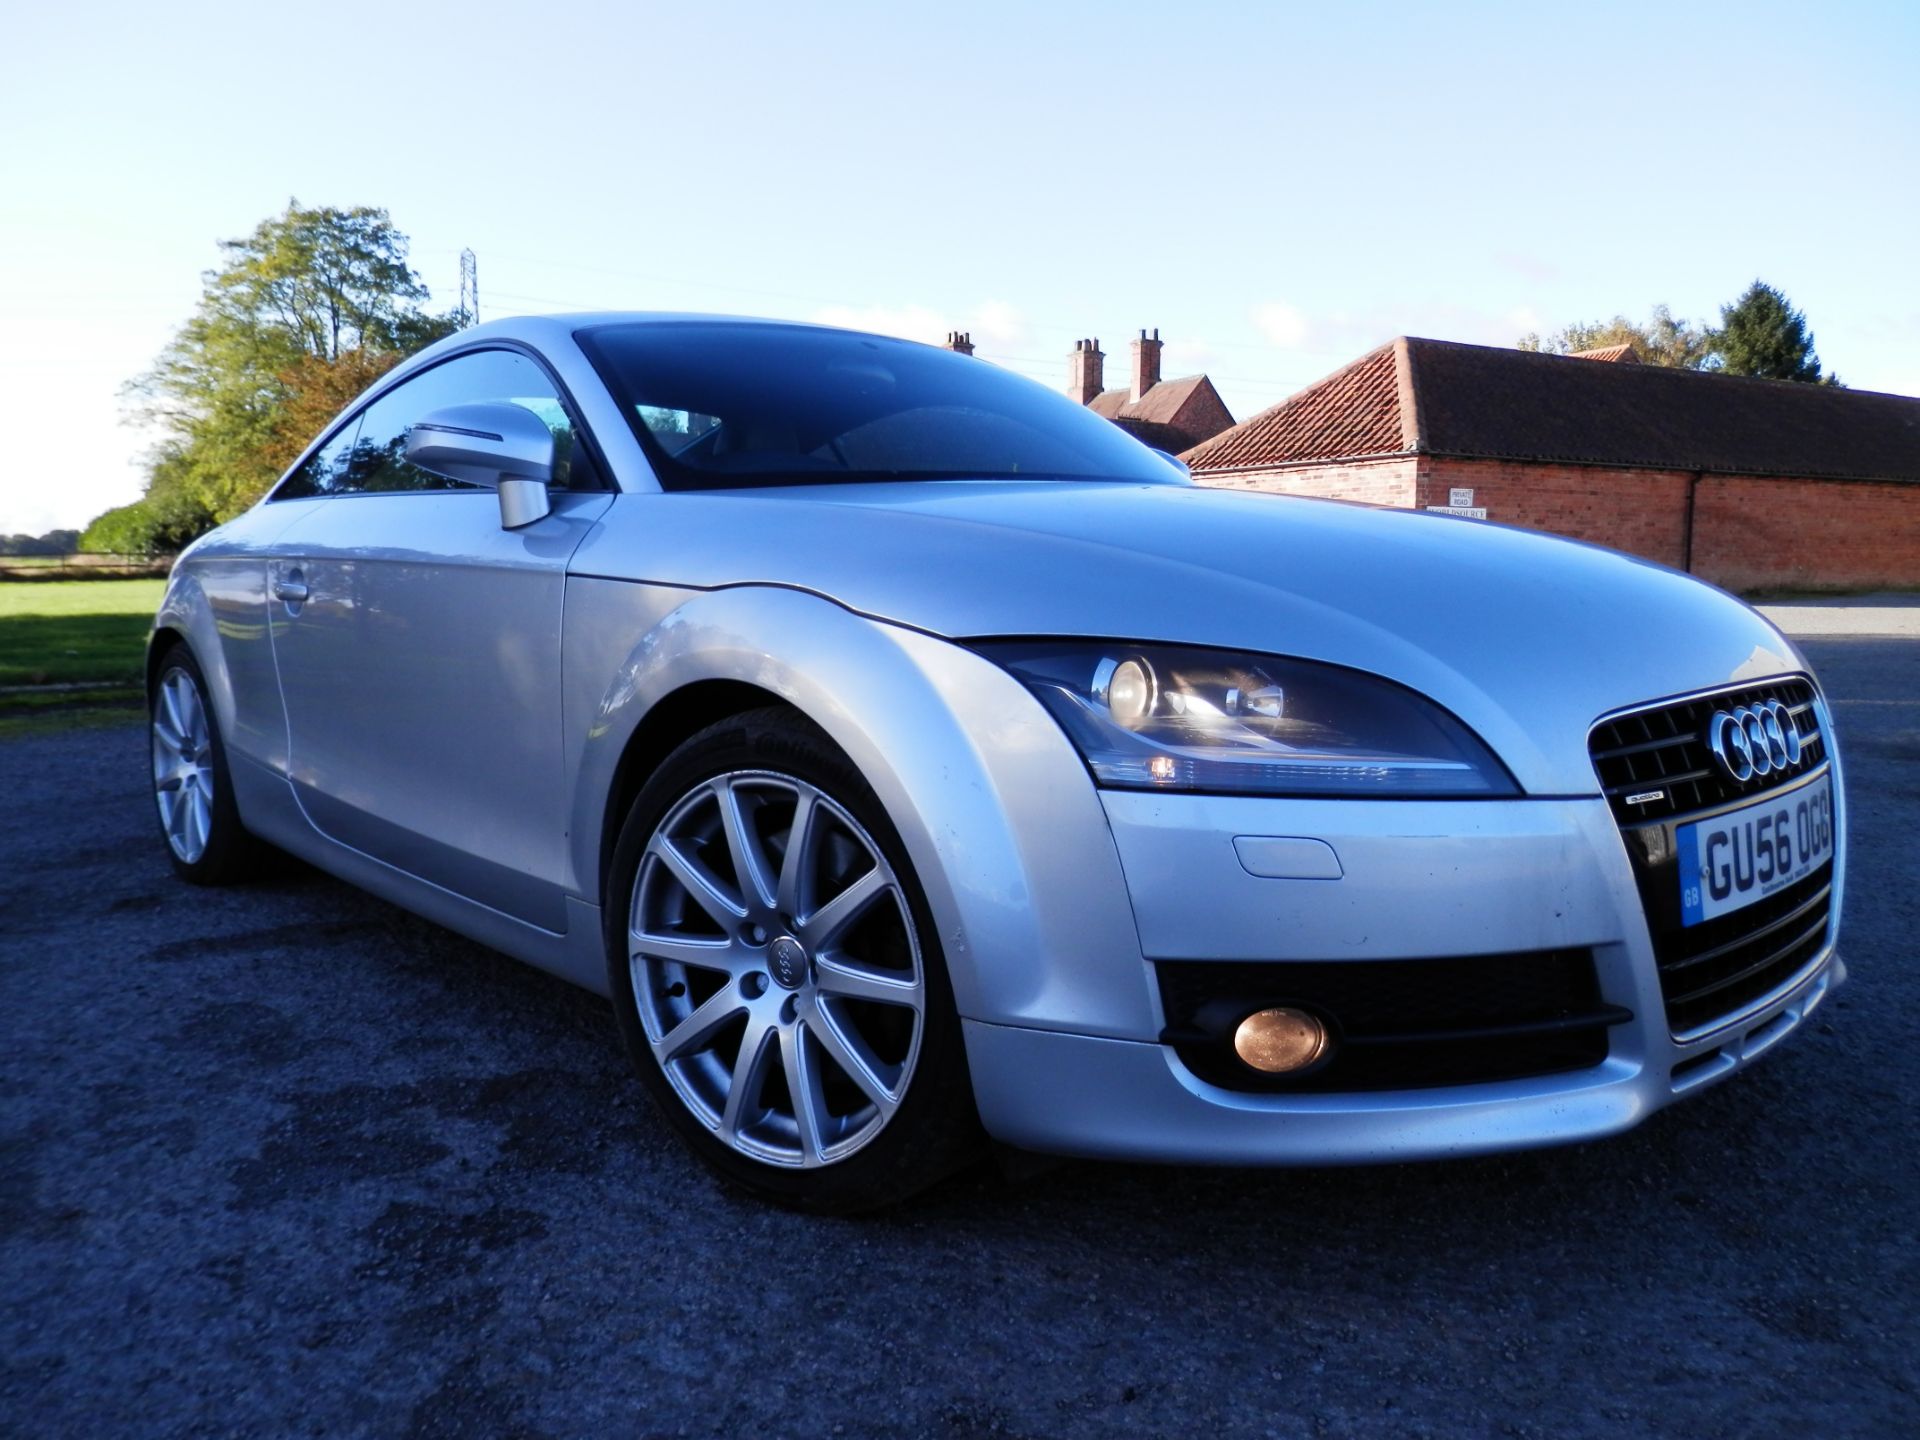 2006/56 PLATE AUDI TT QUATTRO 3.2 V6, 247 BHP, 12 MONTHS MOT, LATE AUCTION ENTRY, PRICED TO SELL !!